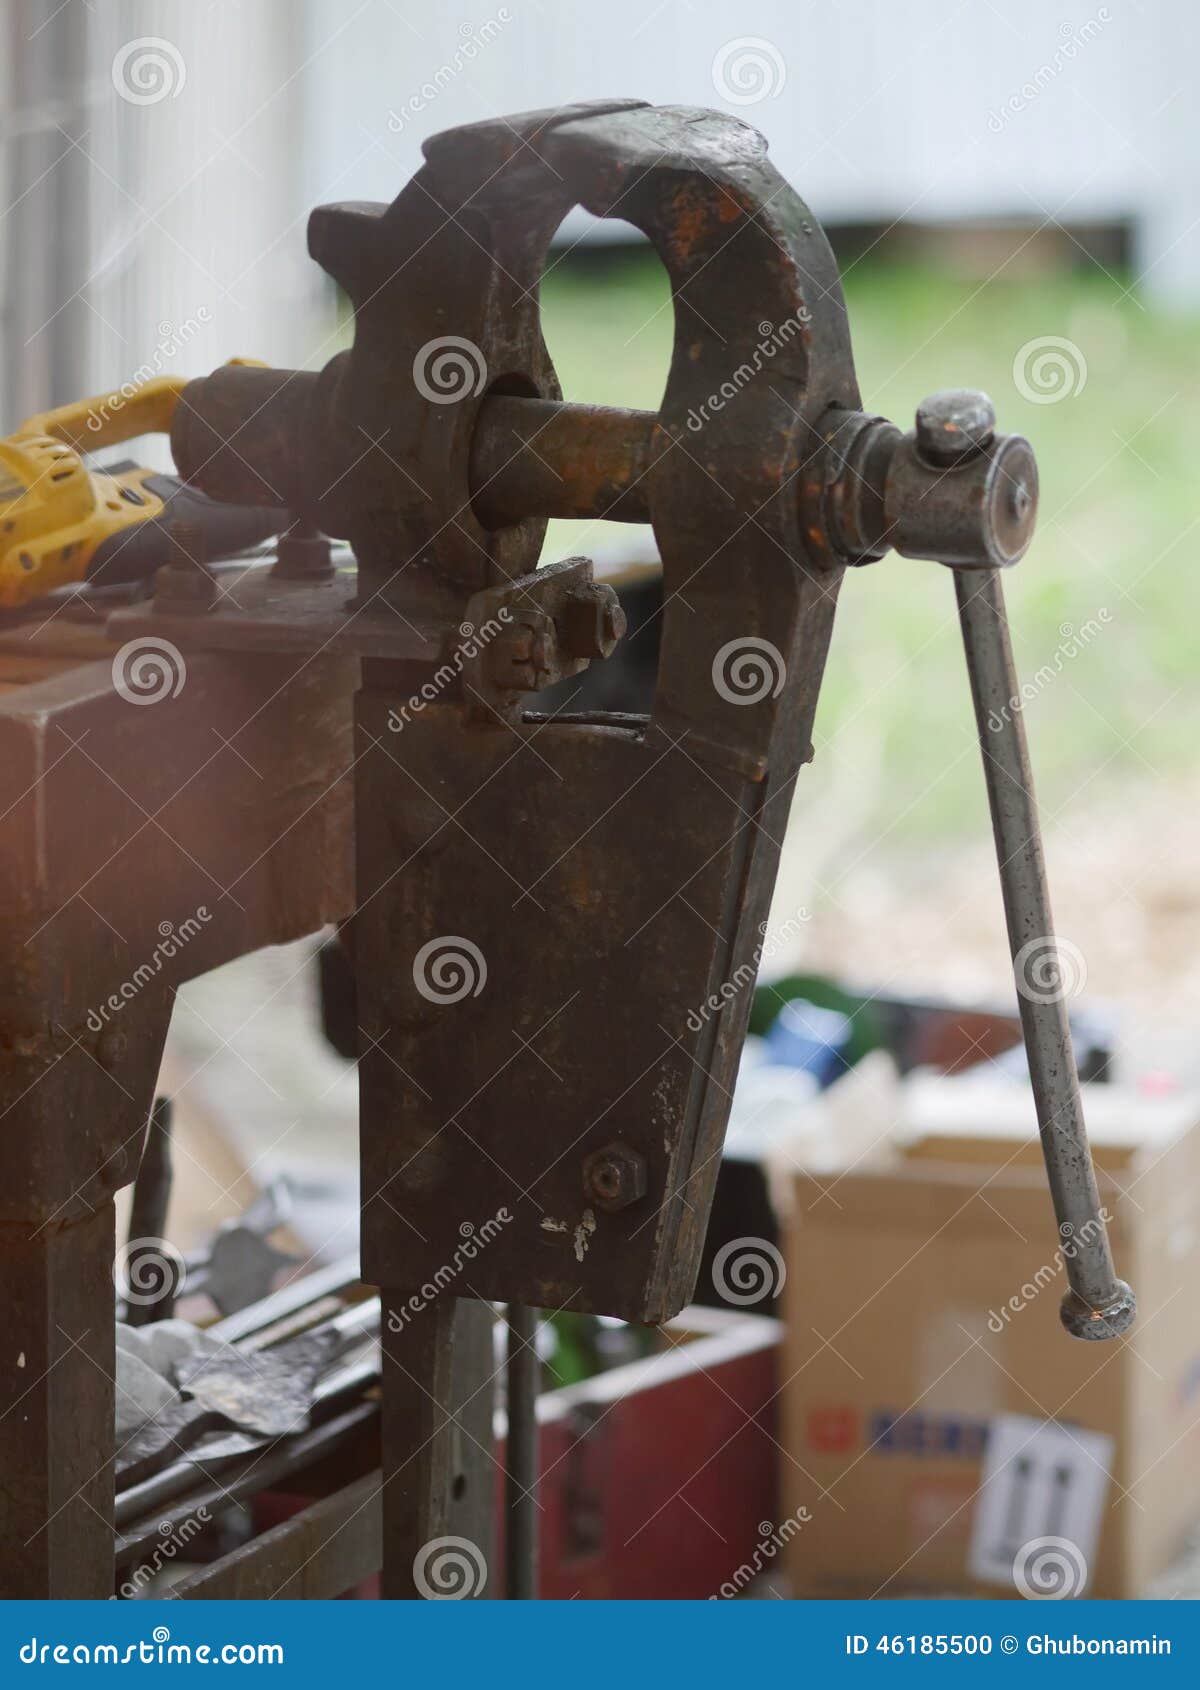 Bench vise stock photo. Image of industry, work, equipment 